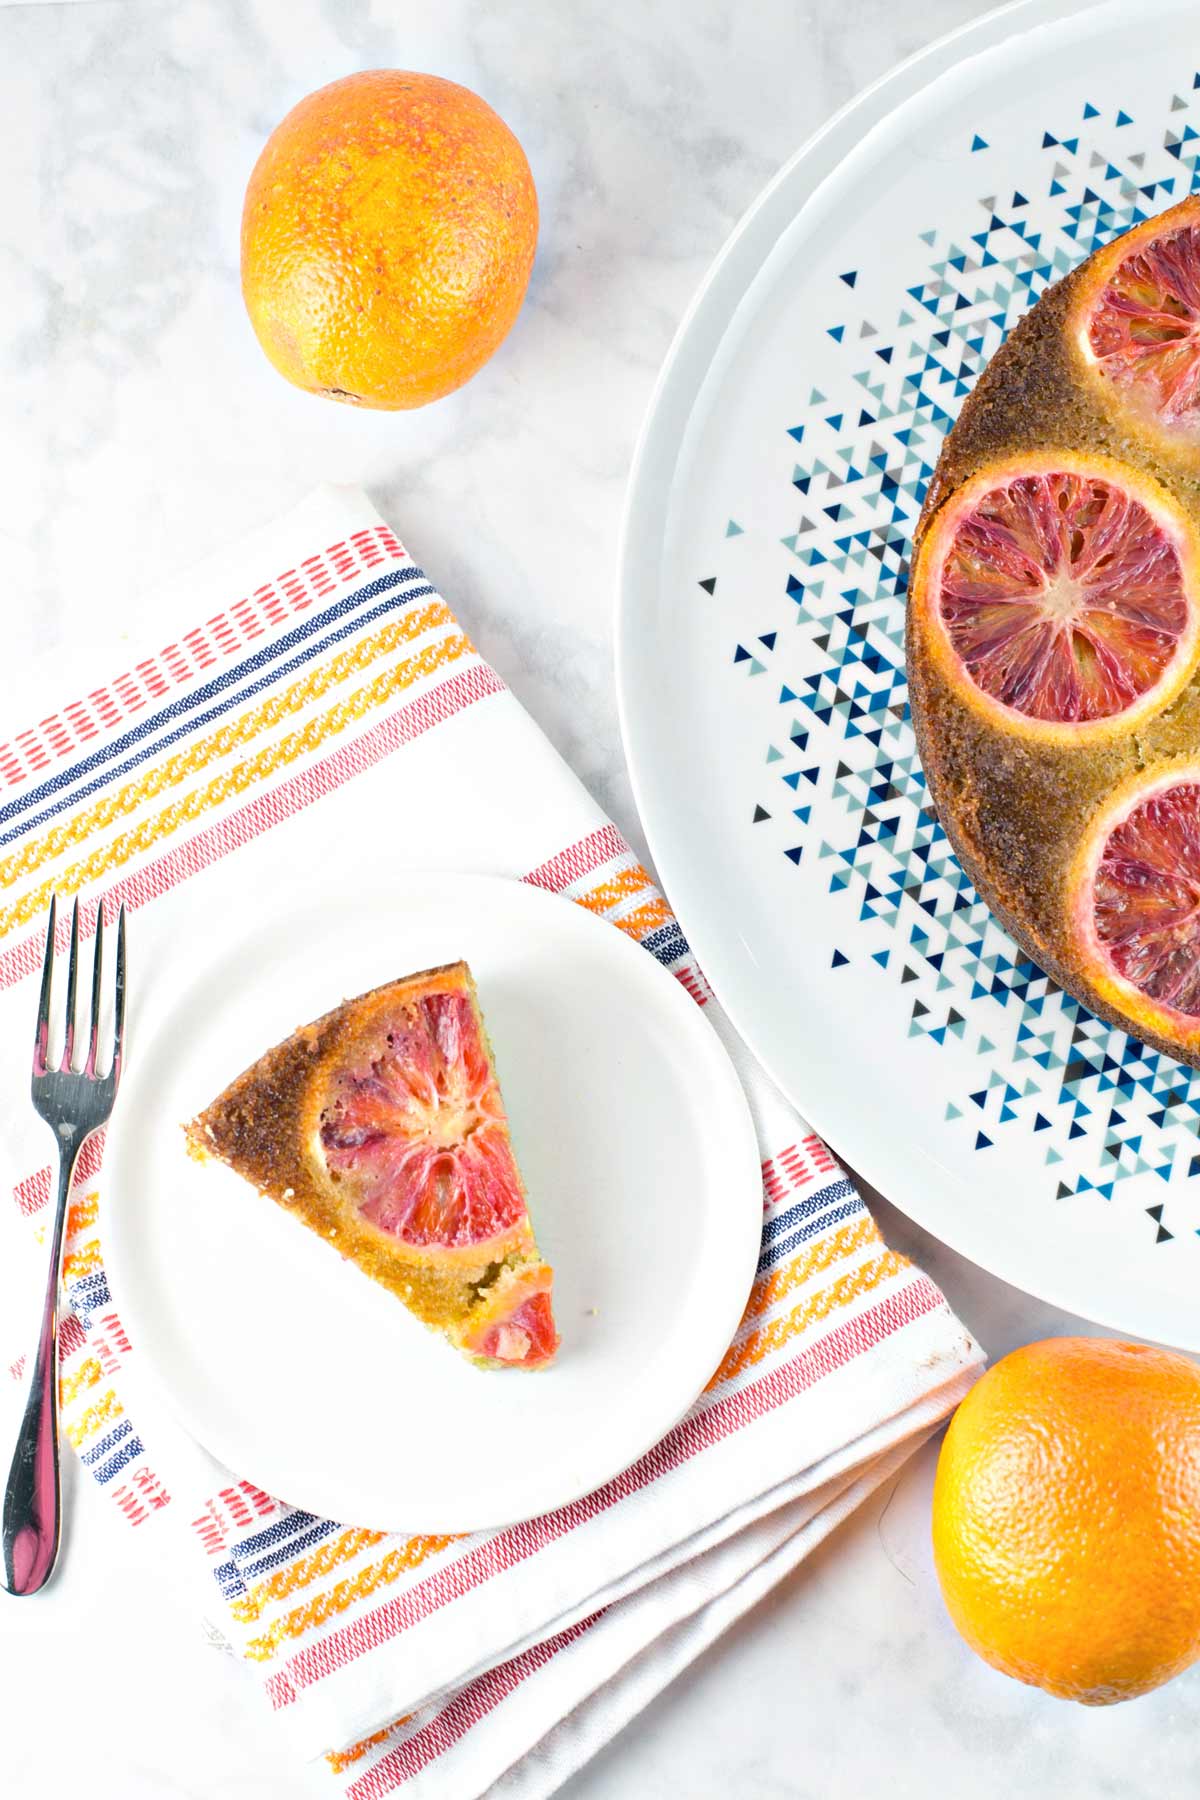 slice of olive oil cake topped with blood oranges next to the rest of the cake